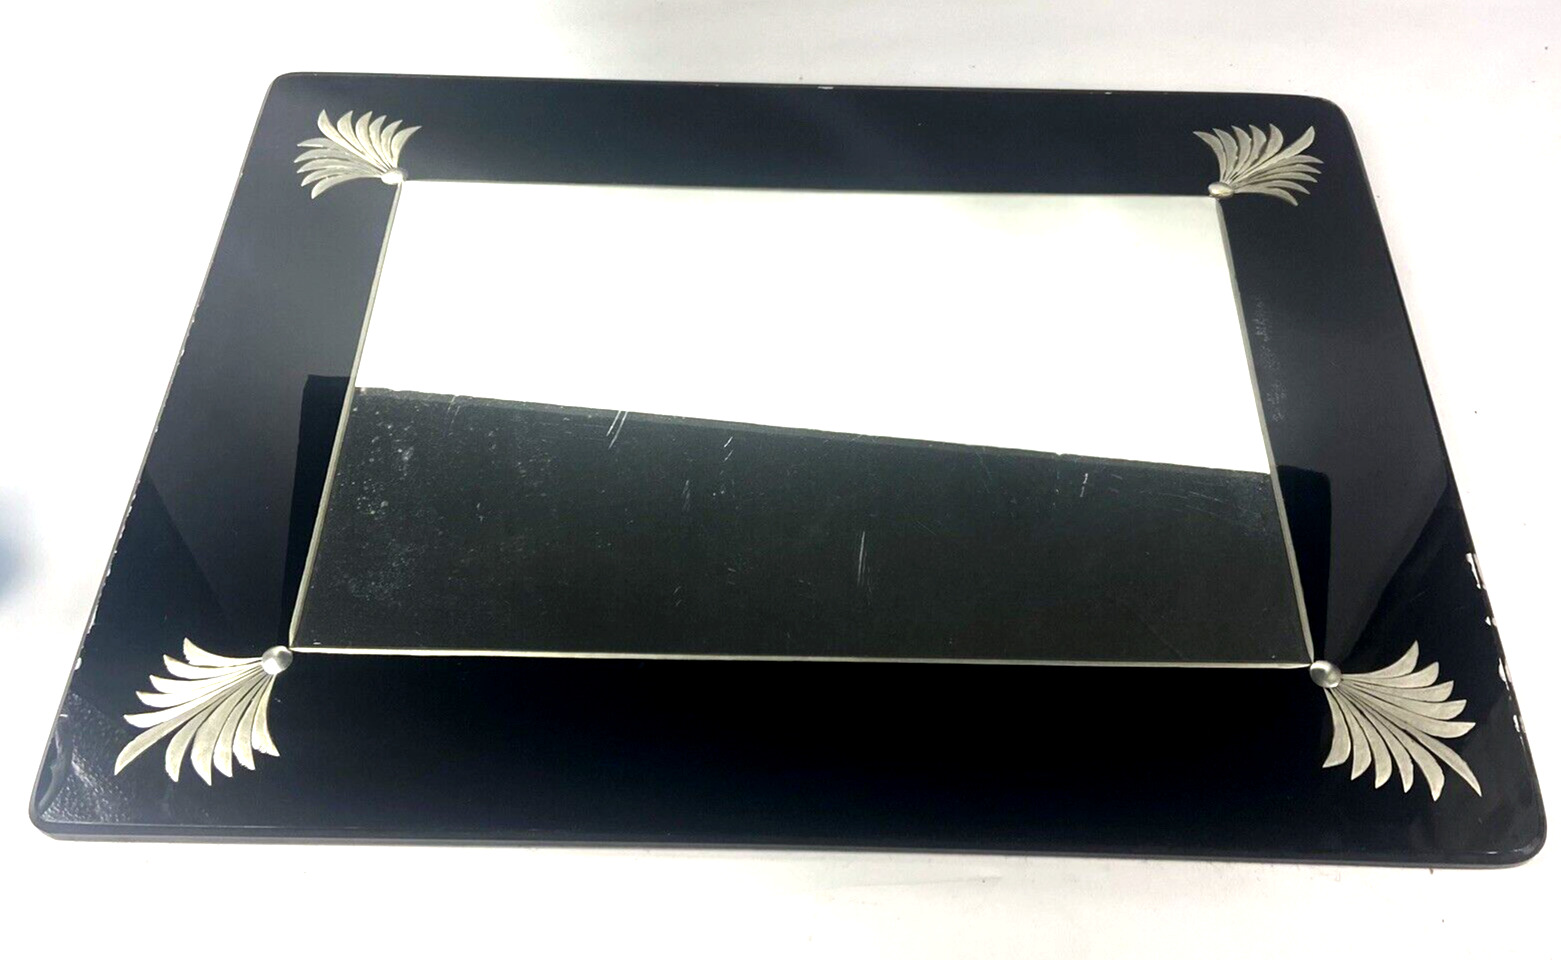 Vintage ART DECO Mirrored VANITY DRESSER TRAY Reverse painted Black and Silver